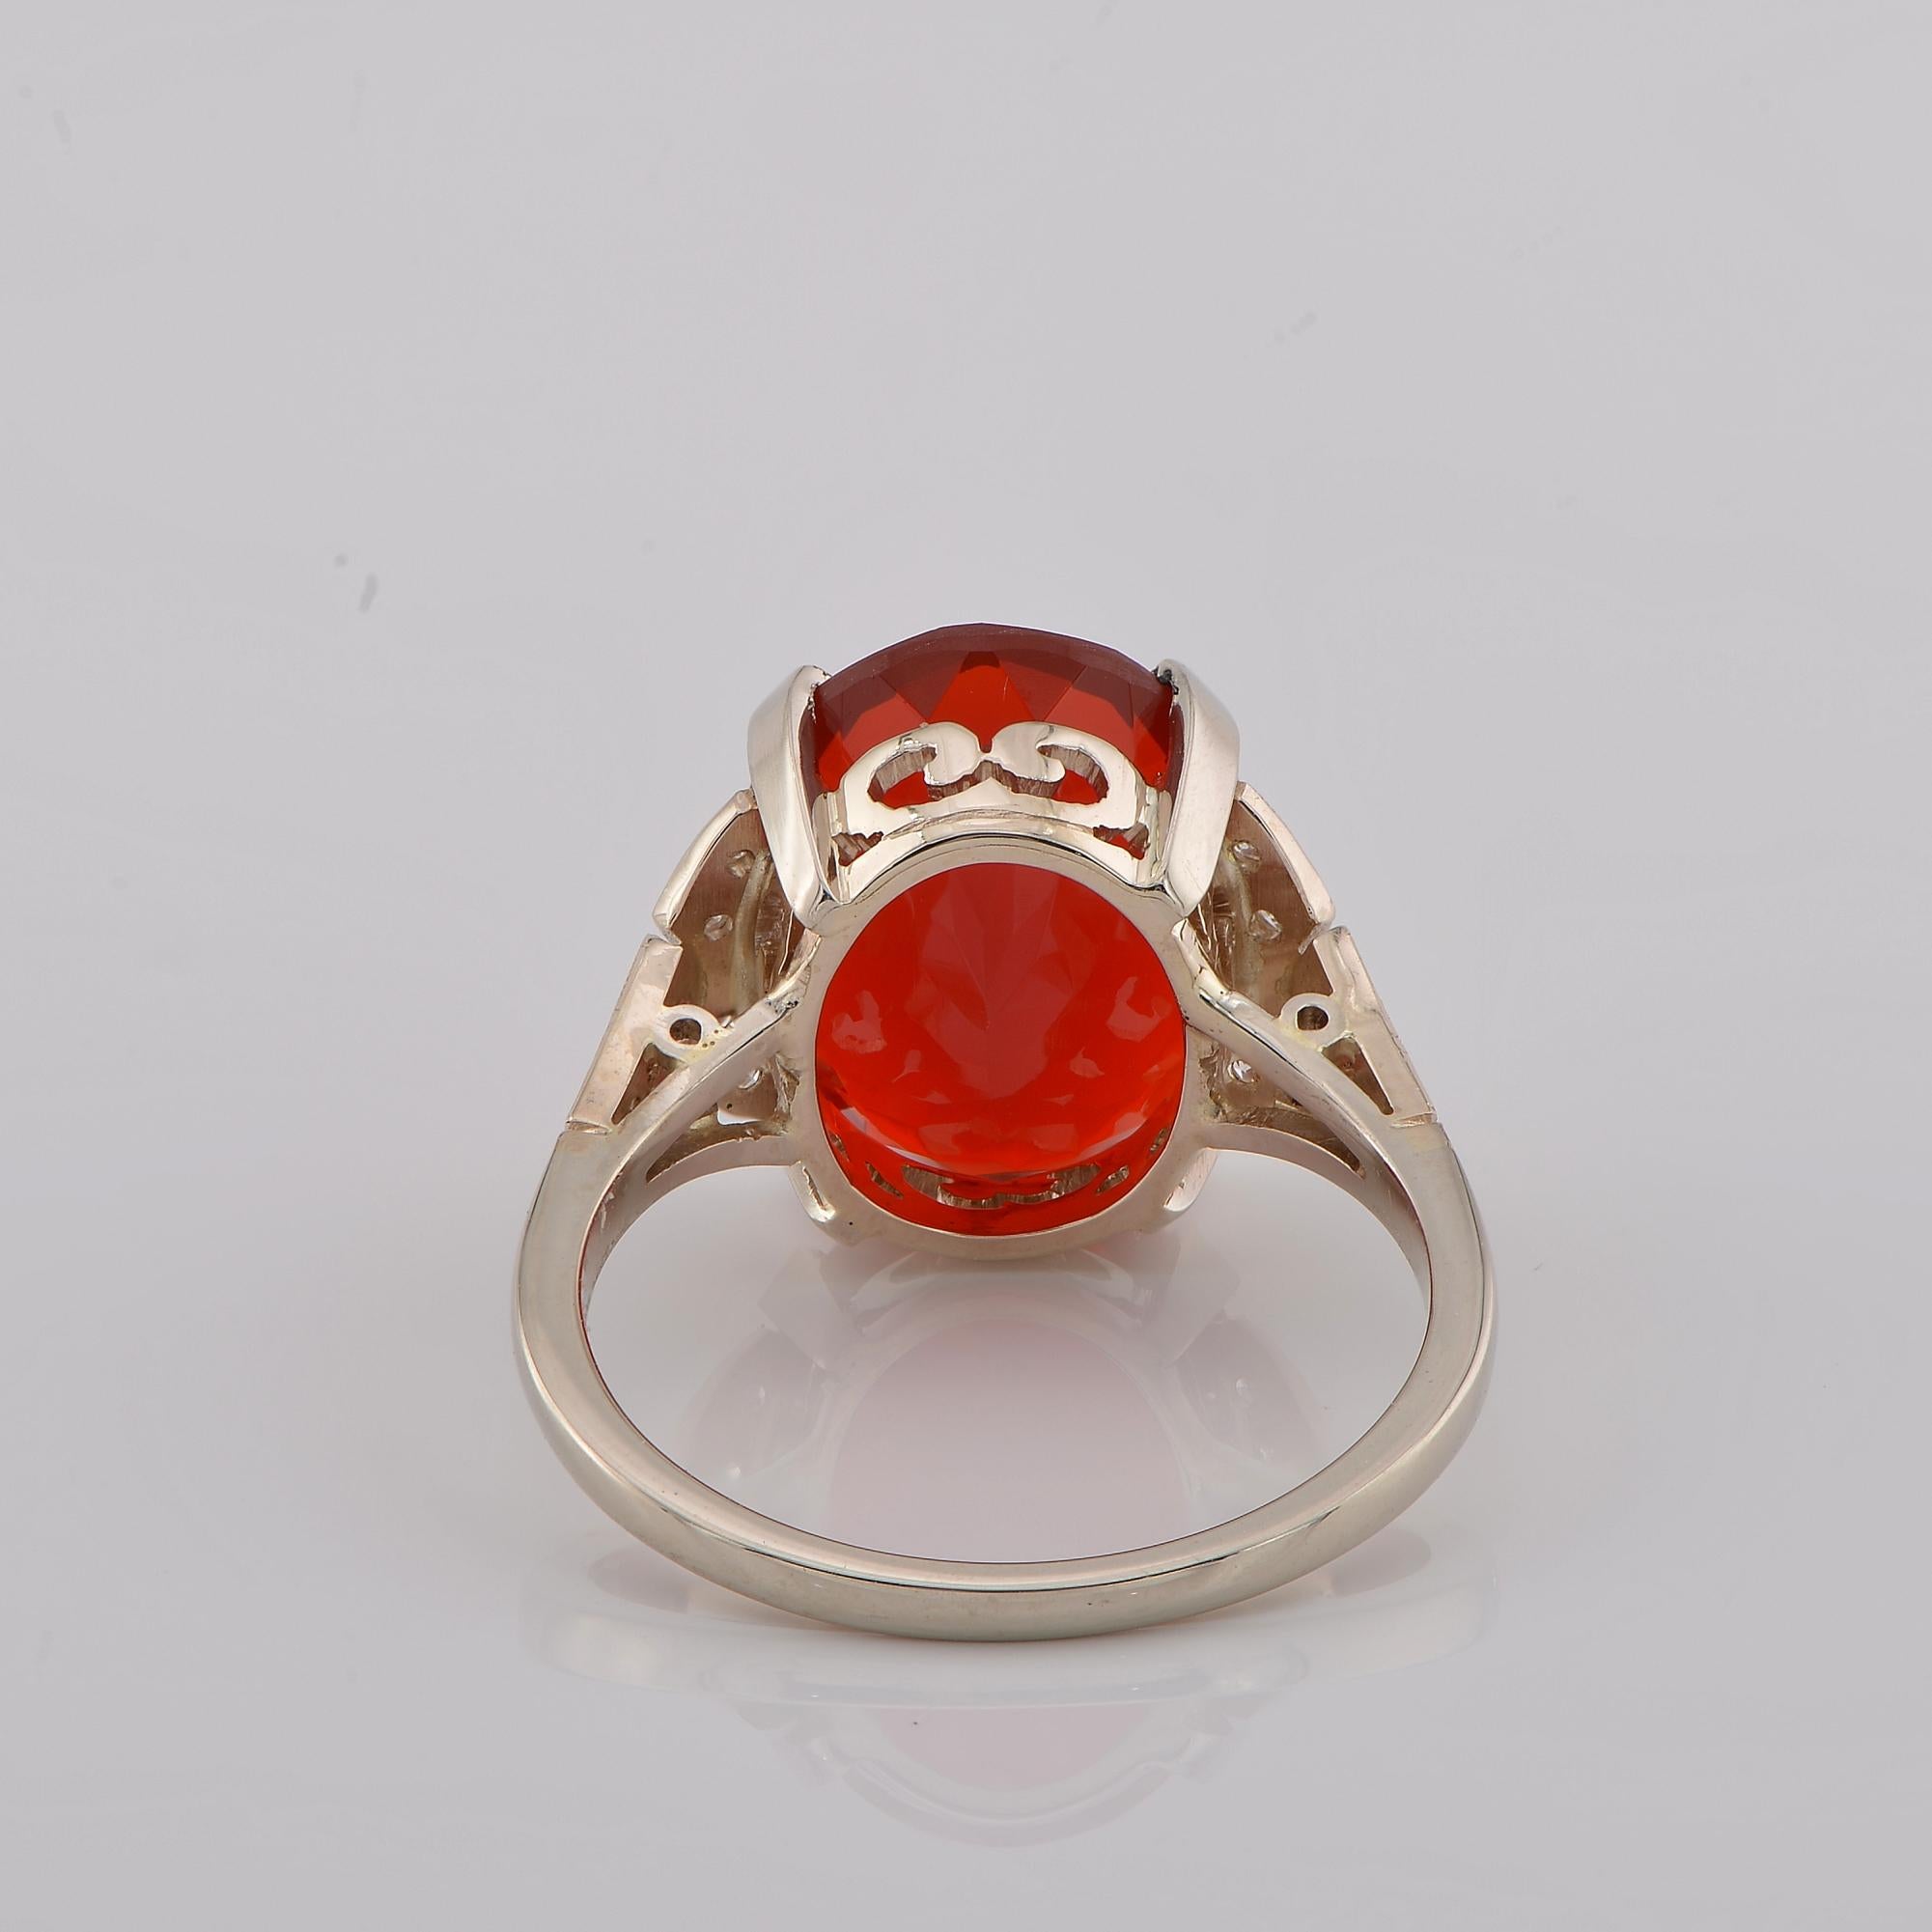 Vintage Style 6.0 Ct. Ruby Red Fire Opal Diamond Solitaire ring For Sale 2